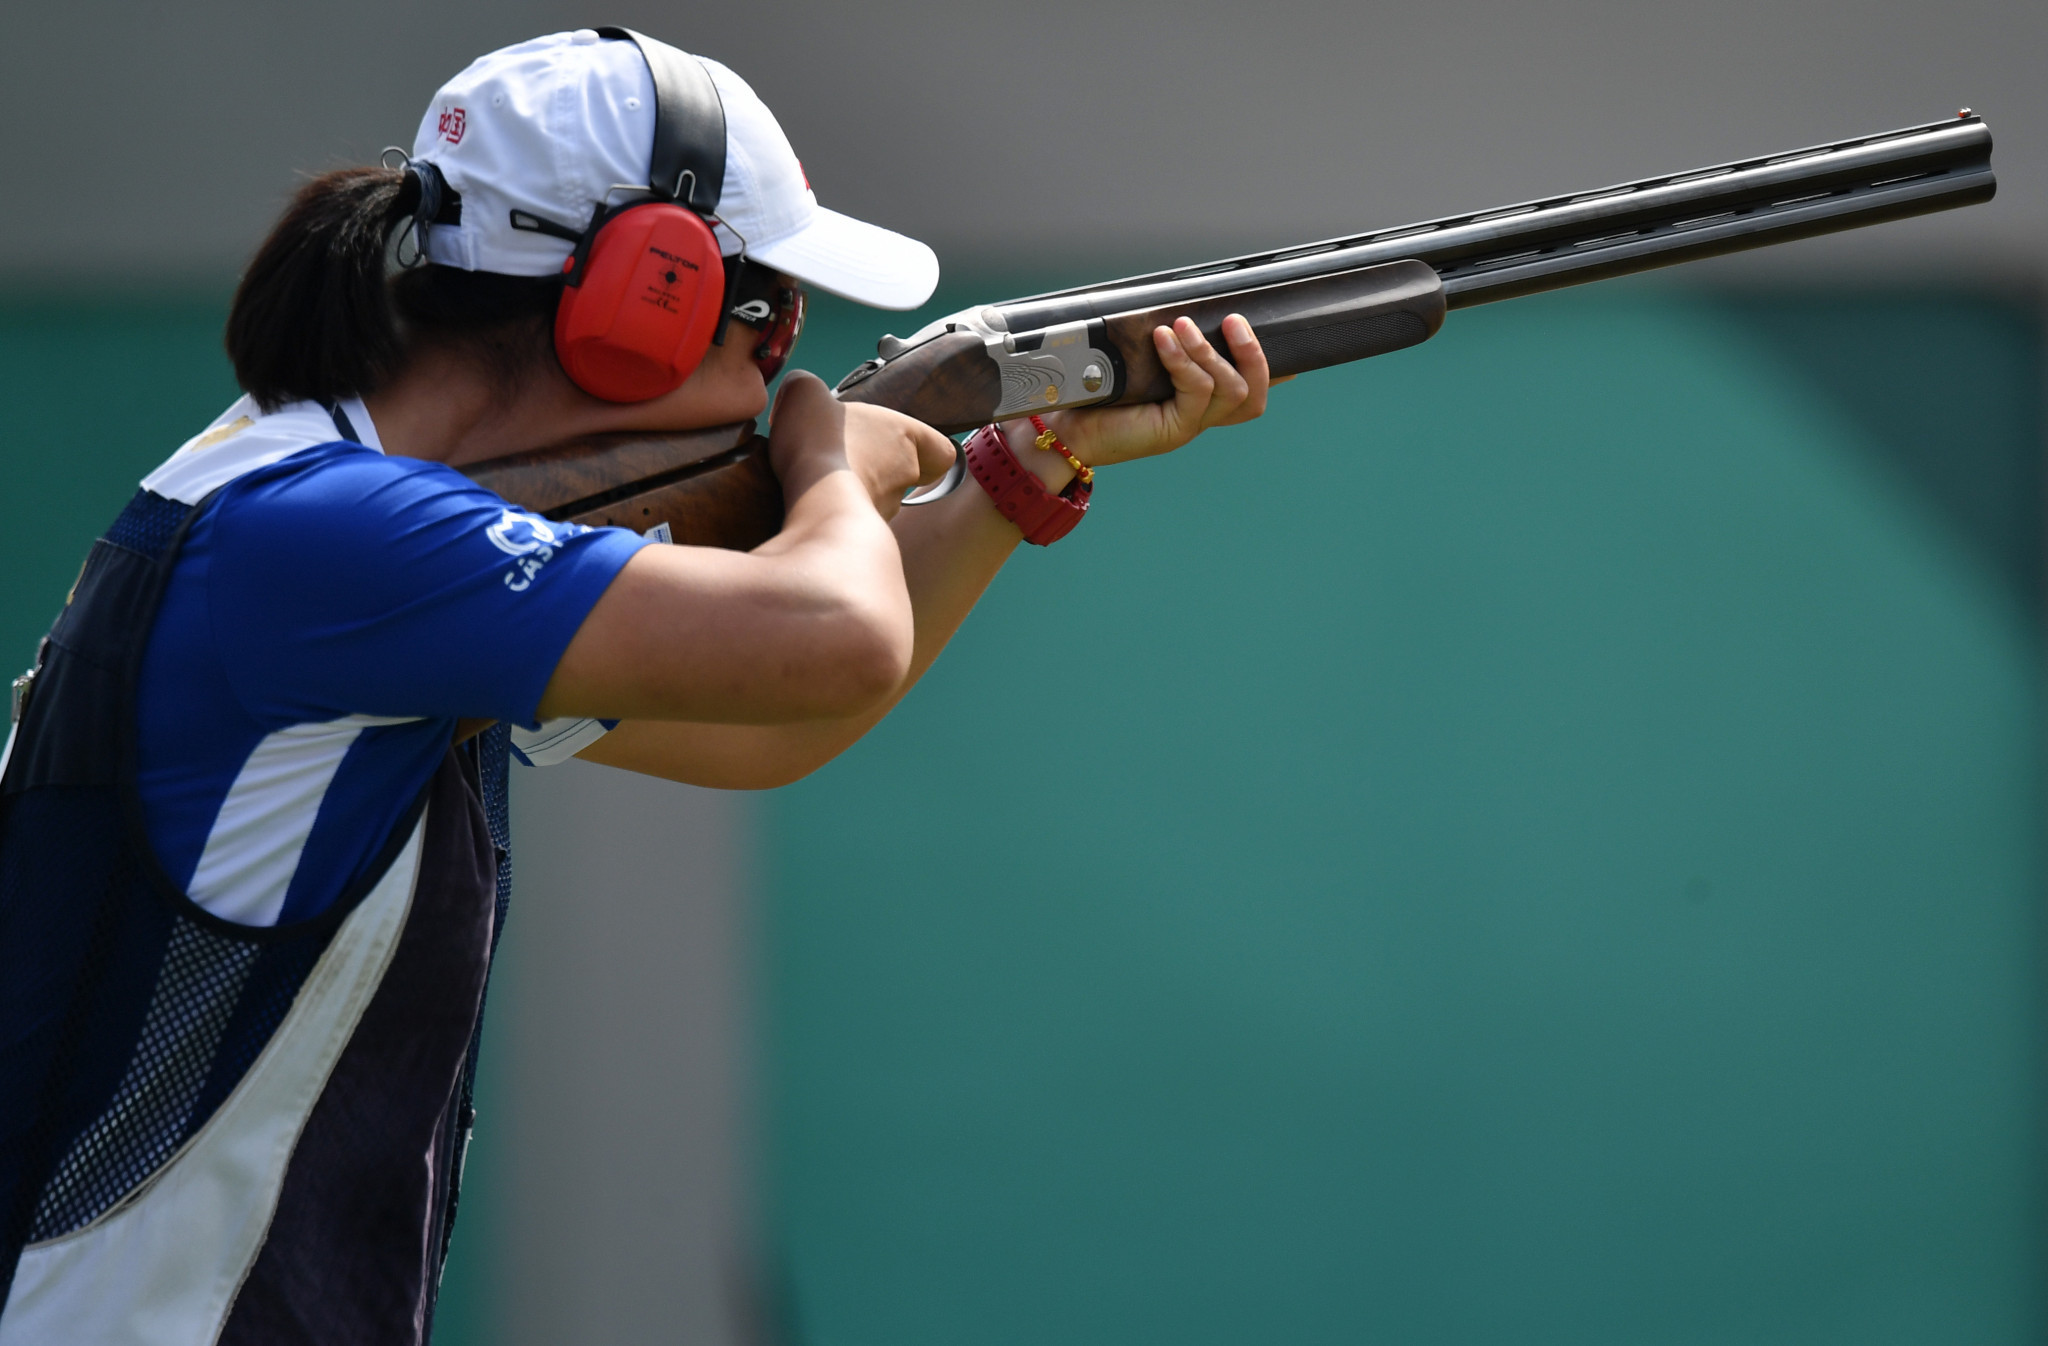 China's Zhang Xinqiu equalled the Asian record on her way to winning the women's trap shooting competition ©Getty Images